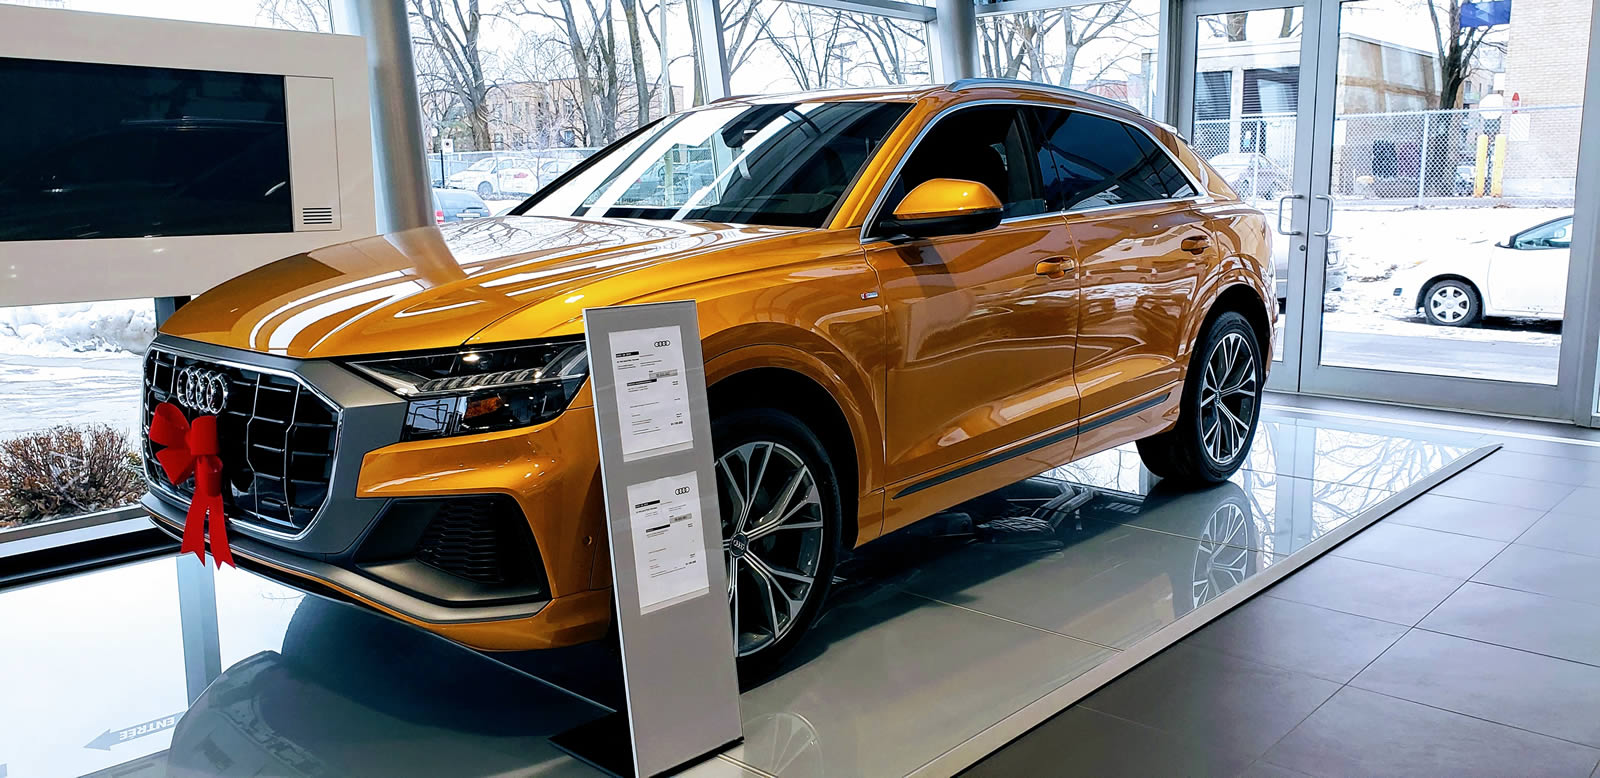 Test Driving the All-new Audi Q8 in Montreal: Showroom Model